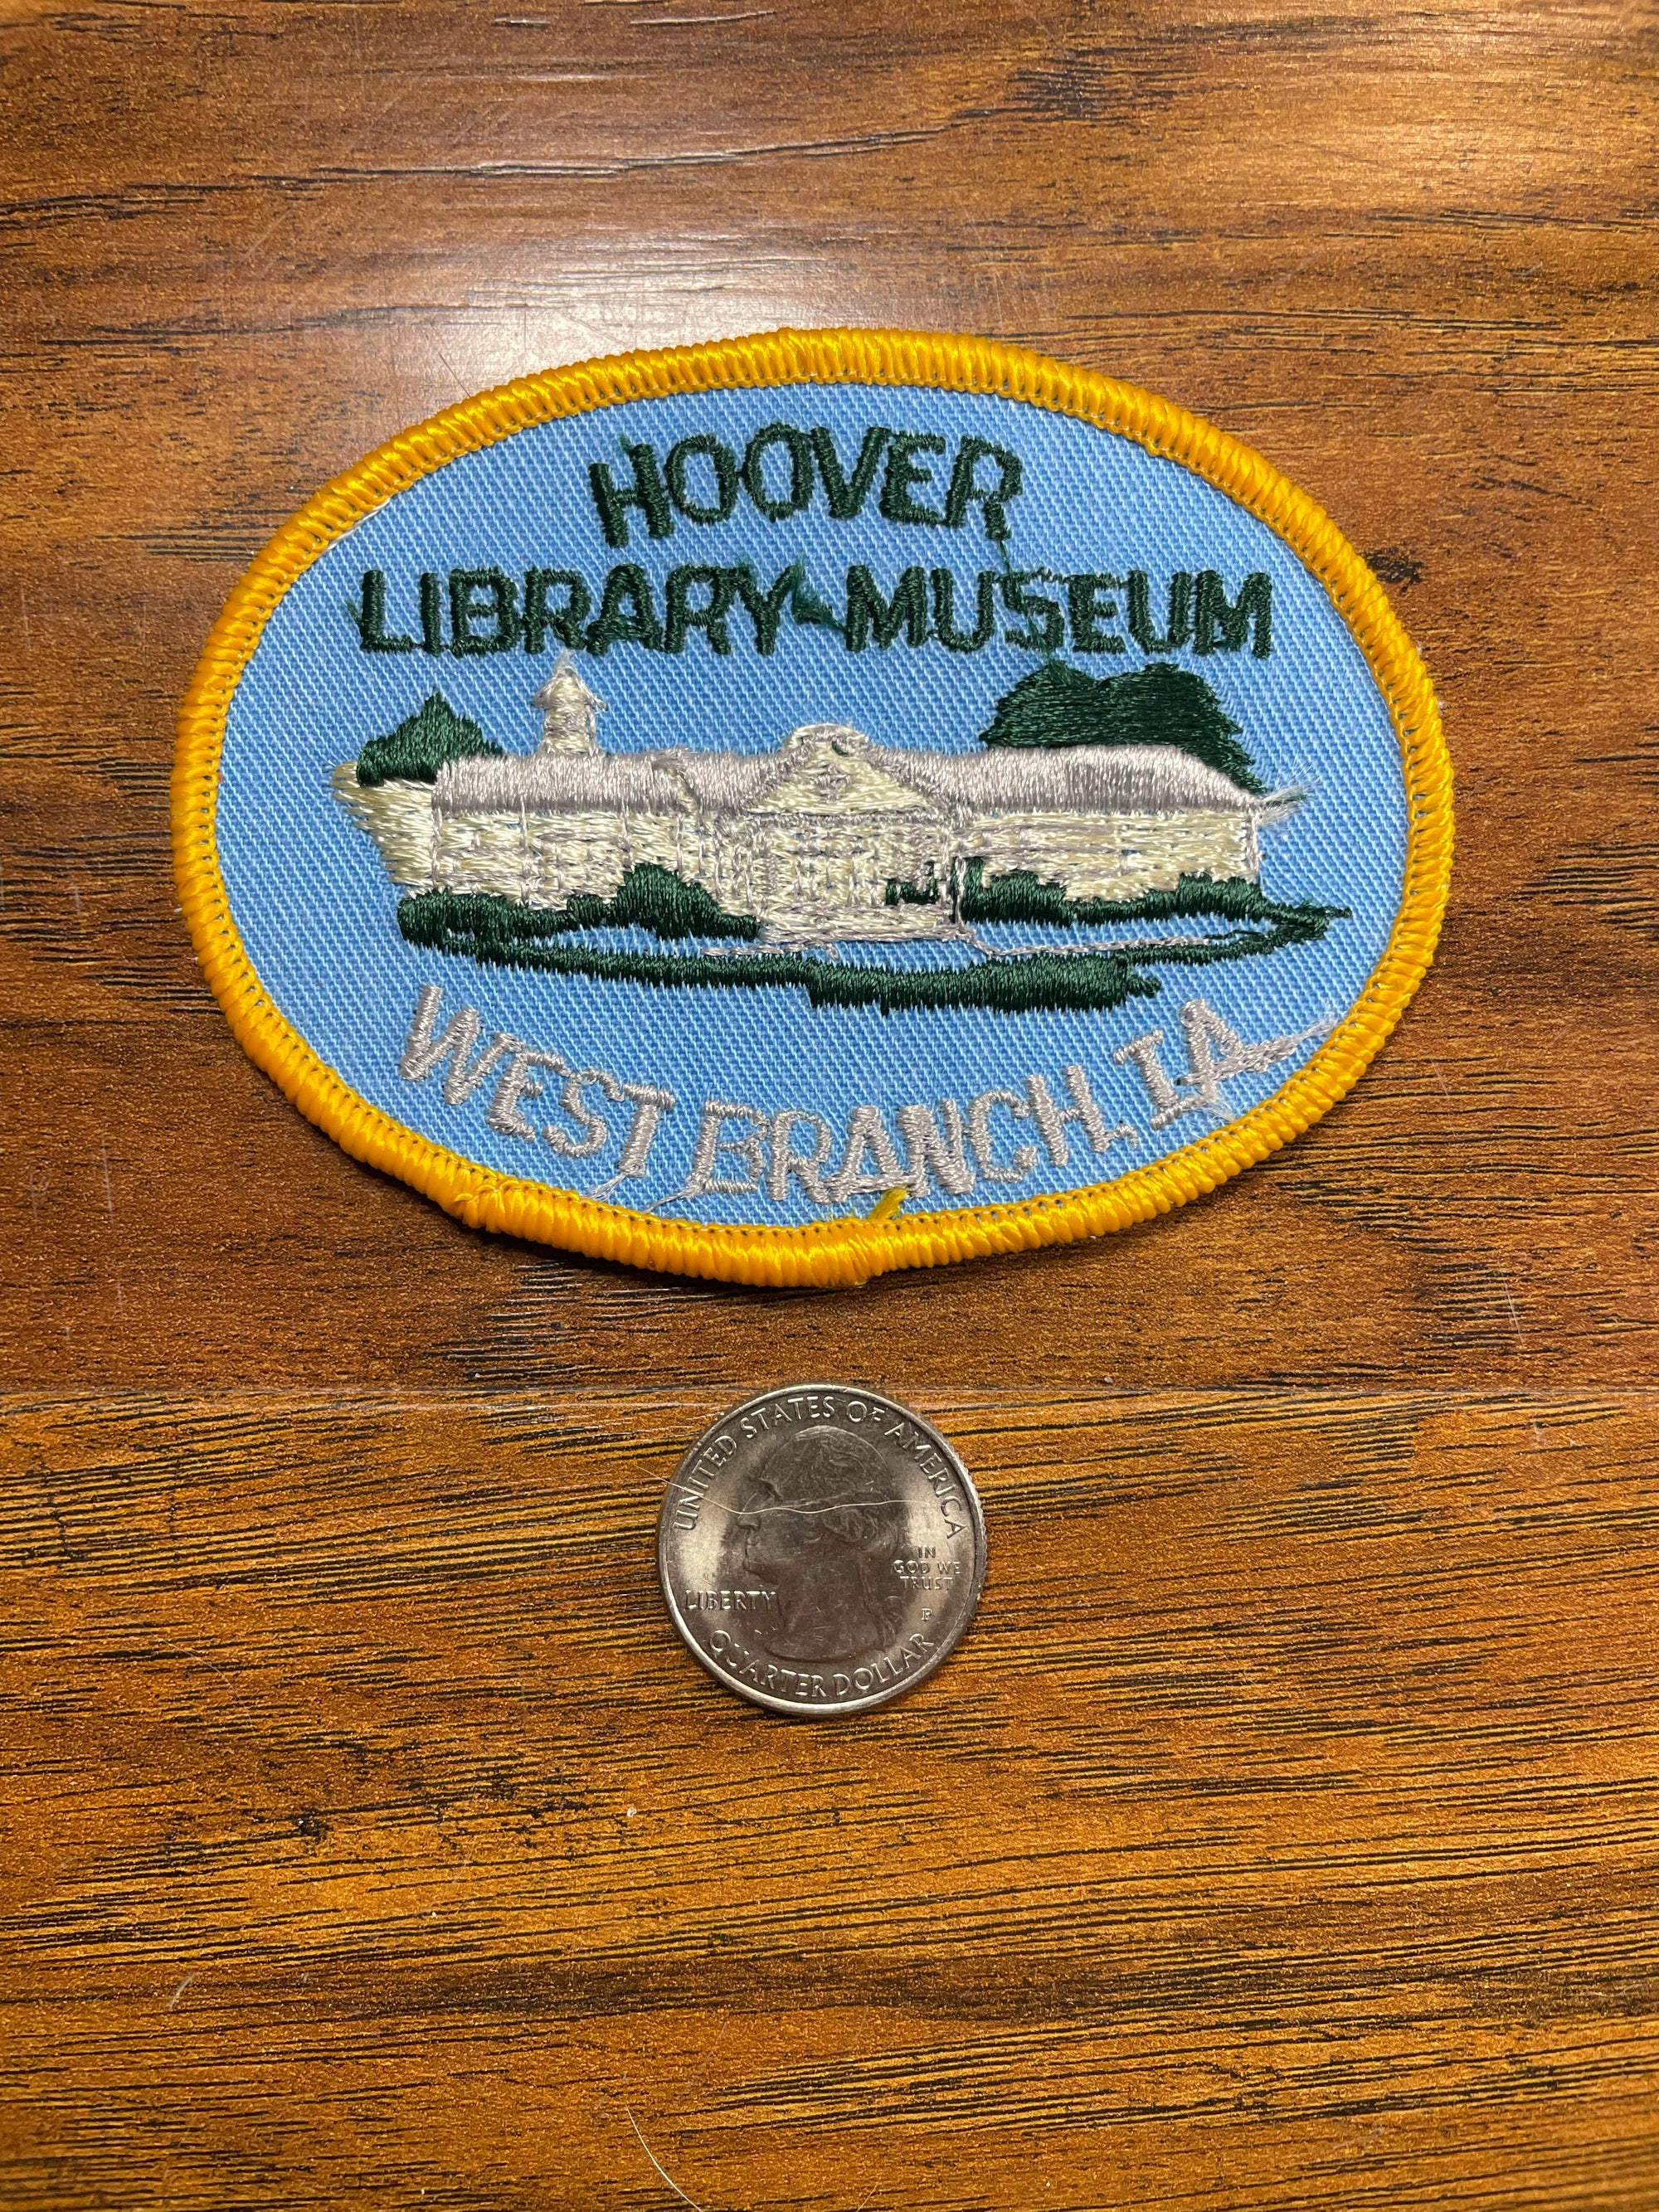 Vintage Hoover Library-Museum